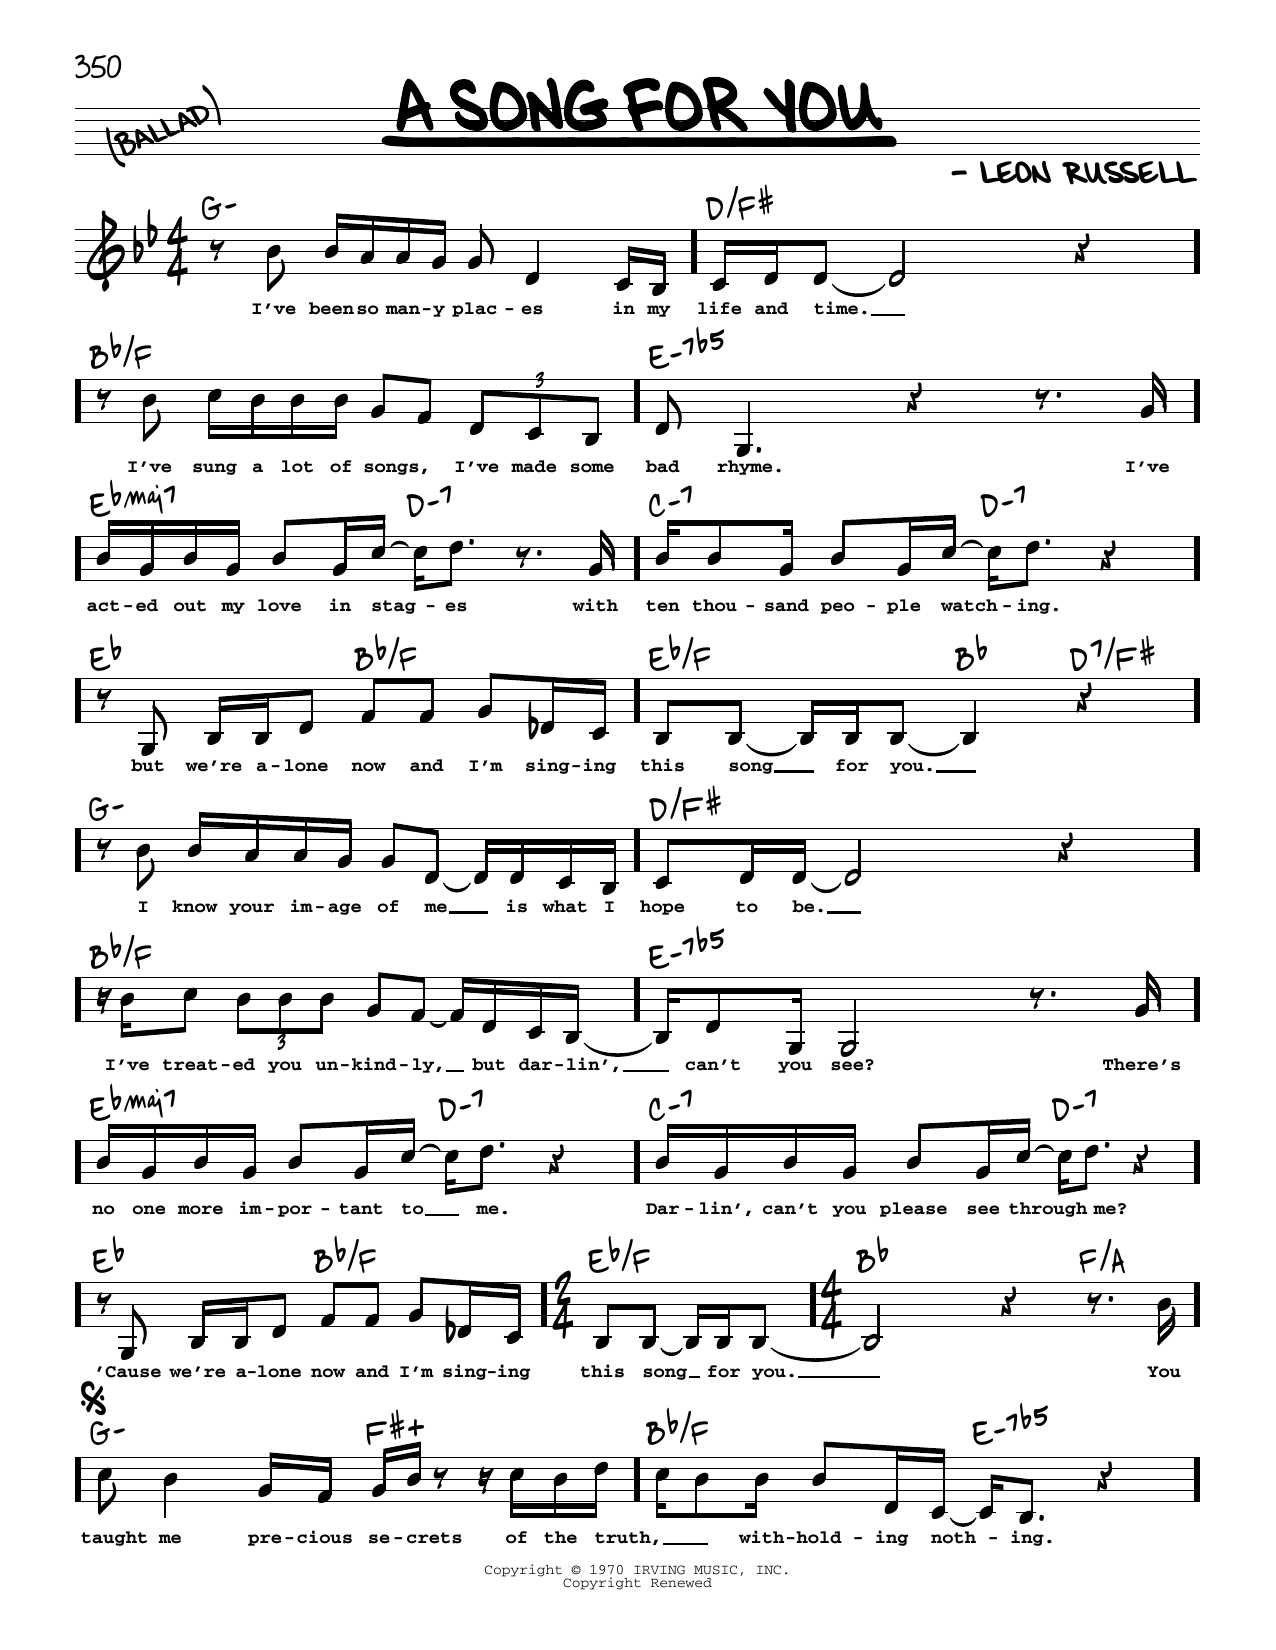 Download The Carpenters A Song For You (Low Voice) Sheet Music